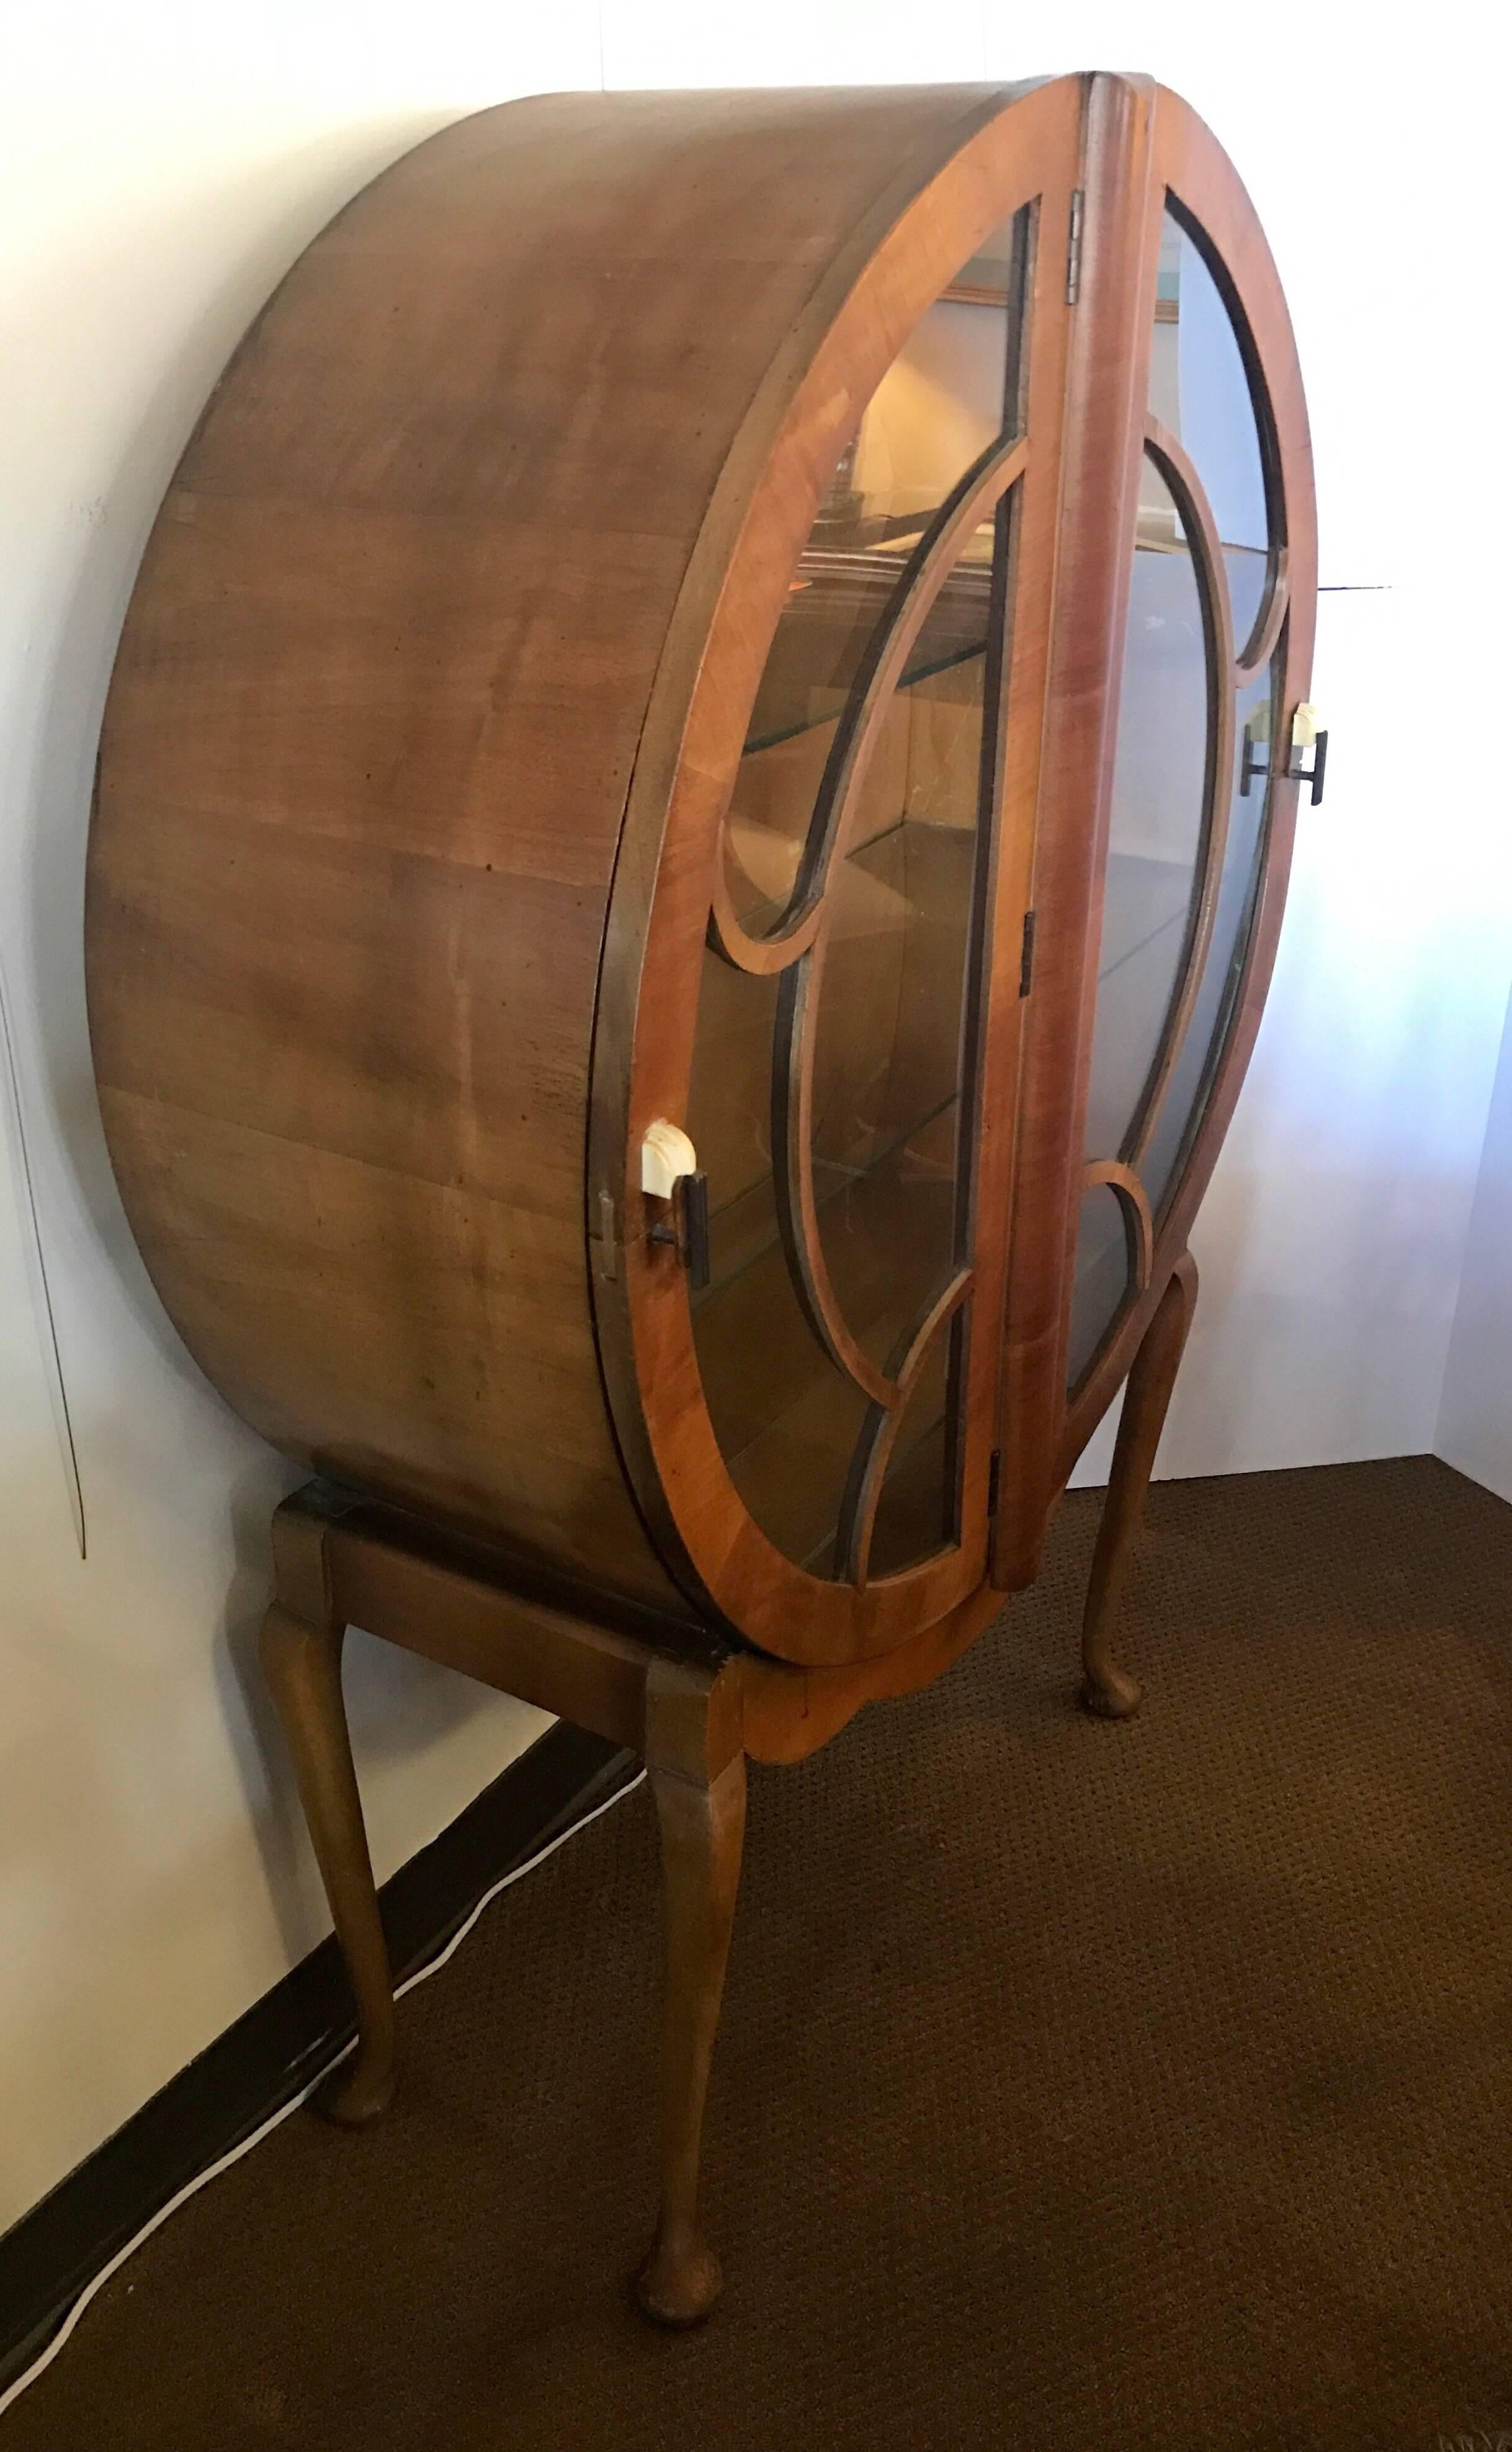 Circular 1930's art deco drinks cabinet by H & L Epstein with signature bakelite handles.
Can be used as a bar or cabinet to showcase your collectibles.